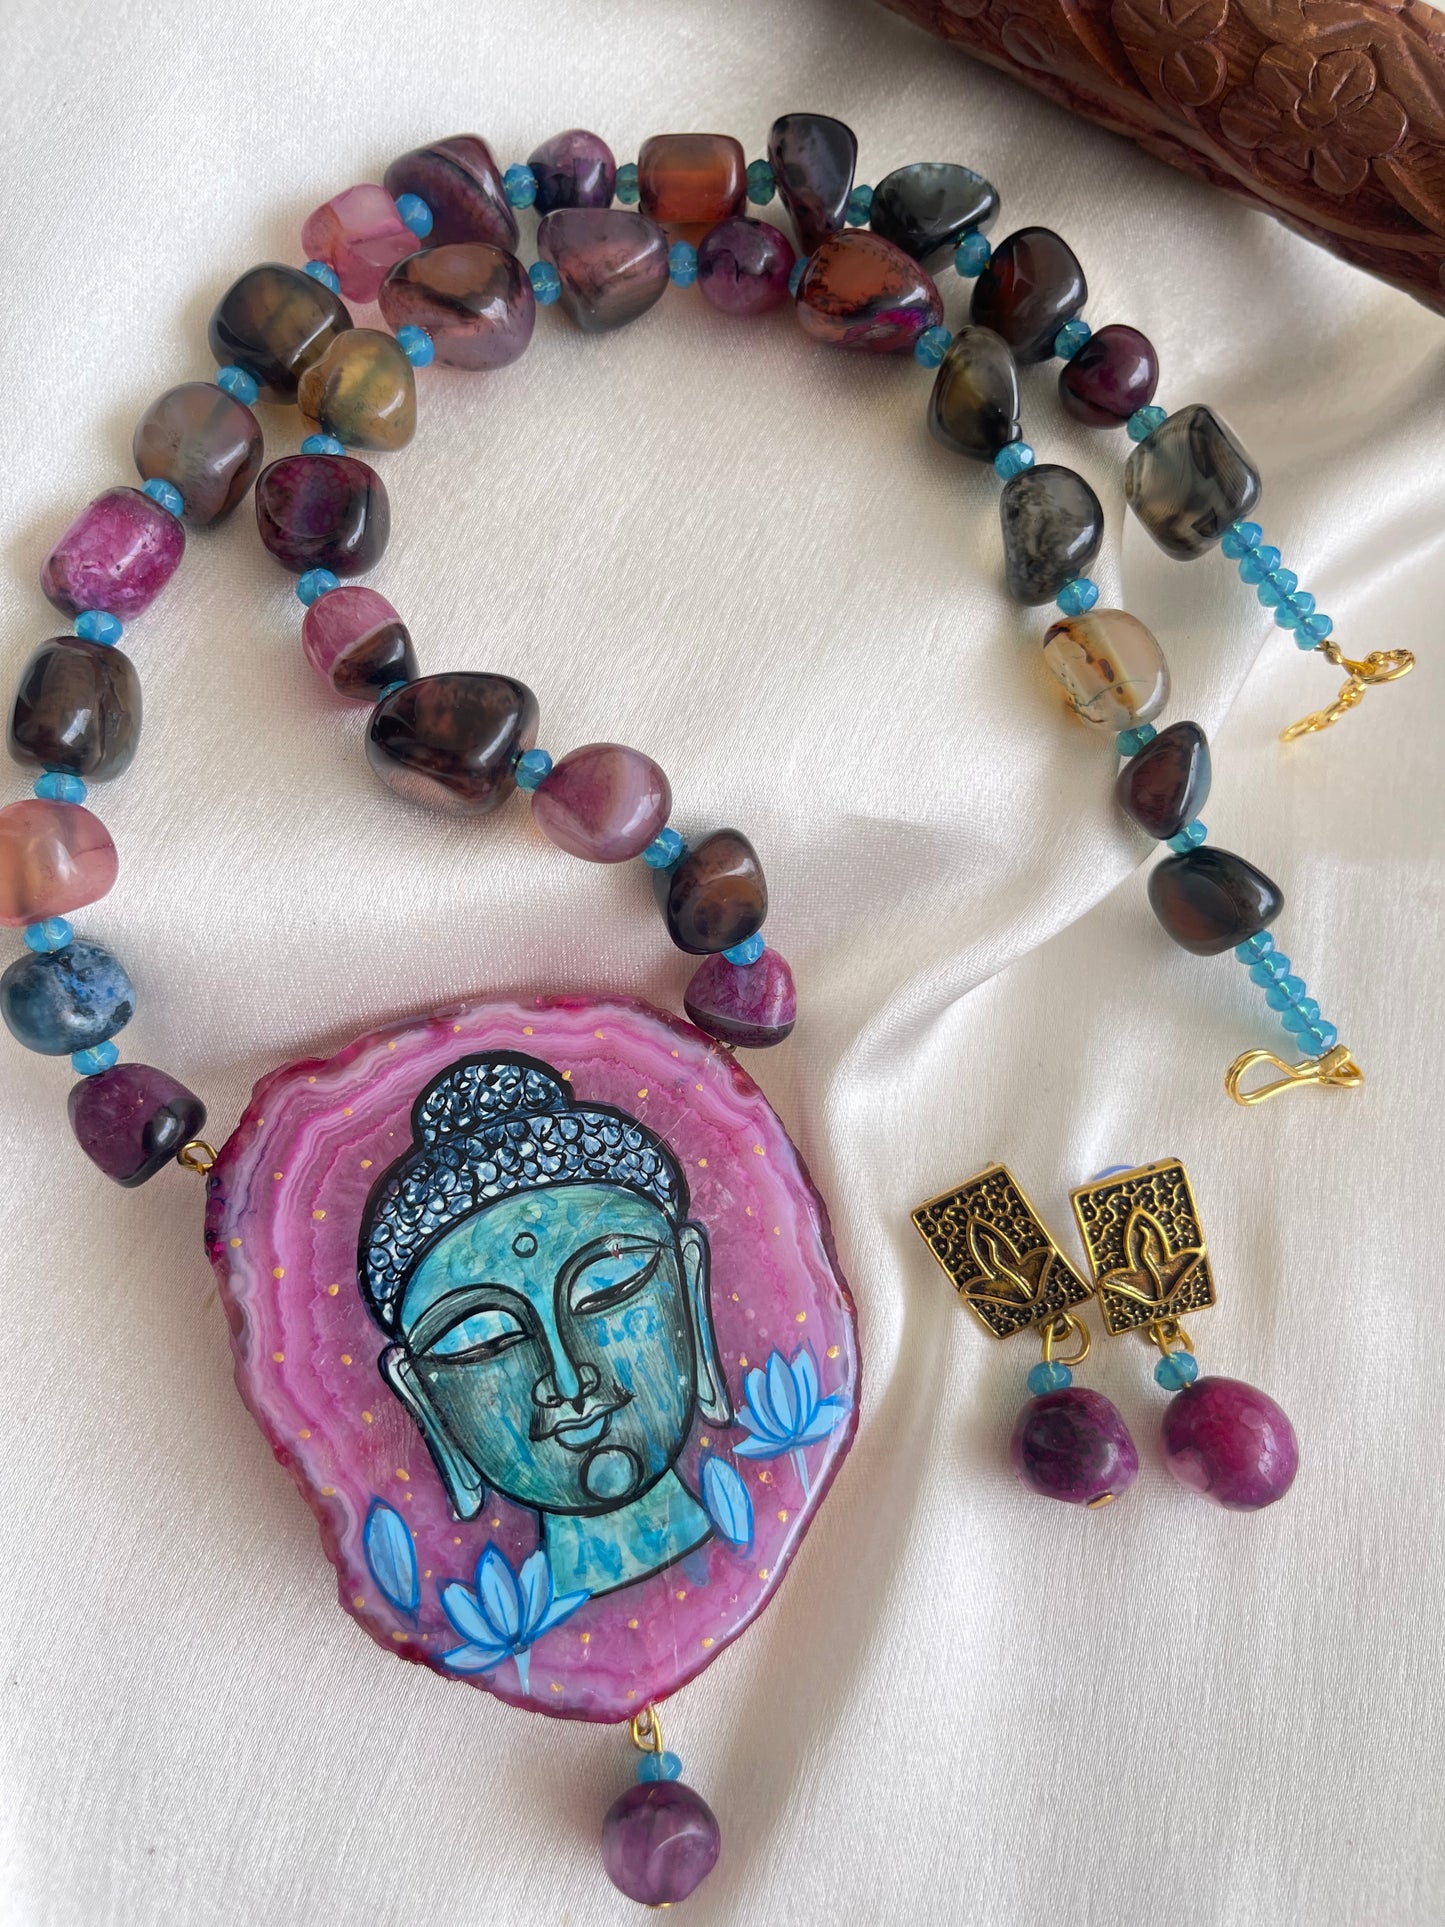 Antique Pink Onyx beaded Buddha Hand painted agate pendant necklace set dj-42554